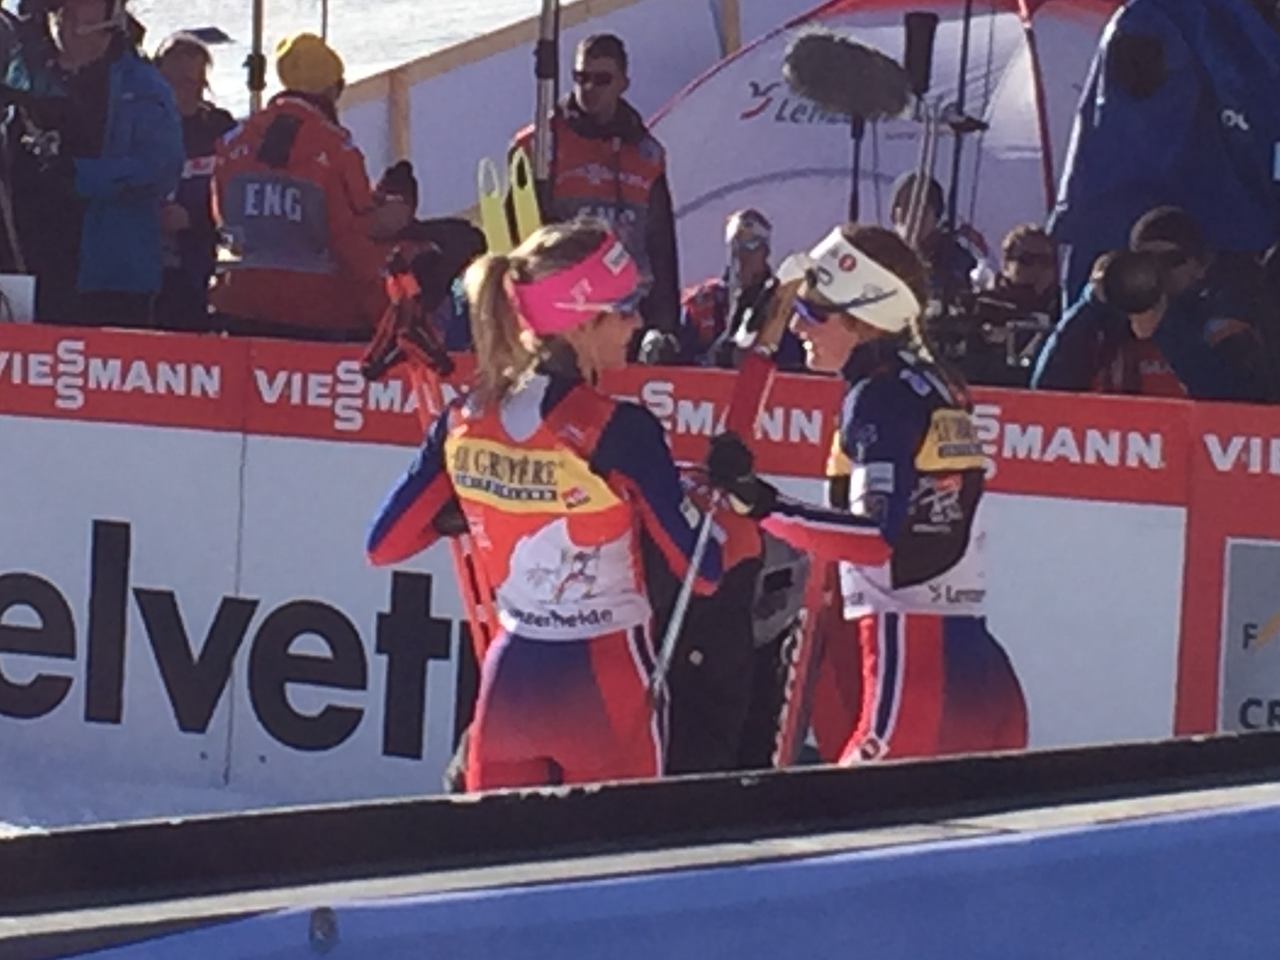 The first- and second-place Norwegians congratulate each other in the finish.